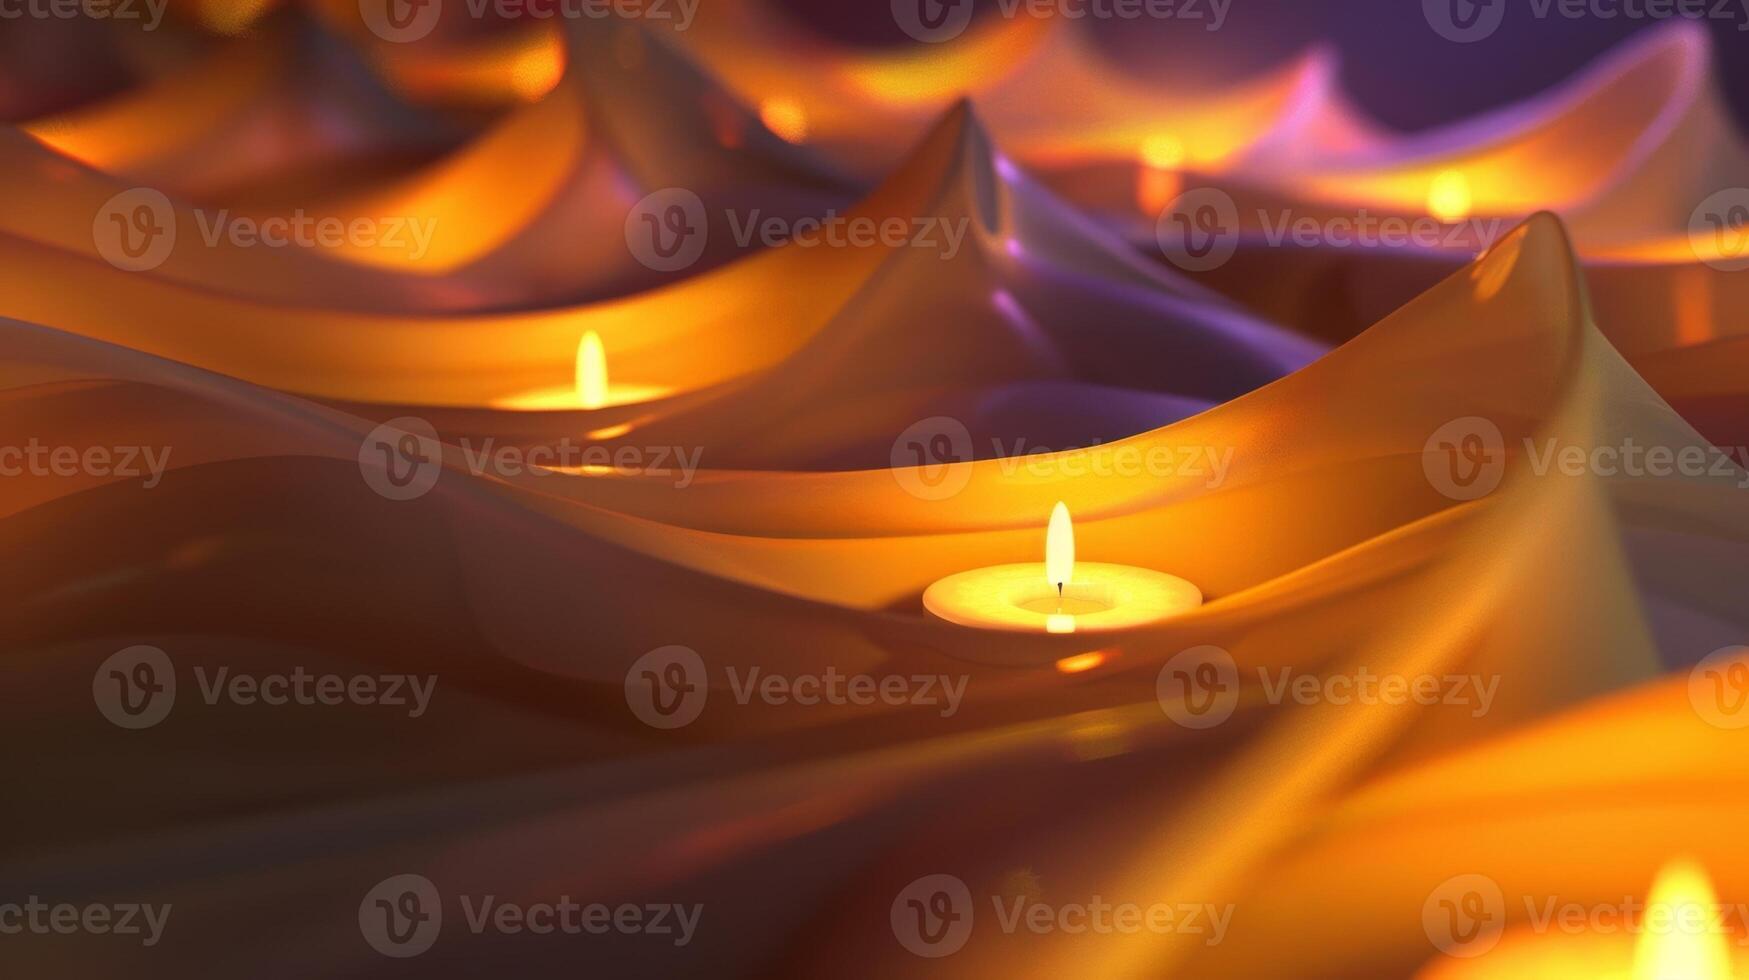 The candles seem to dance in perfect unison creating a serene and meditative rhythm for the mind to follow. 2d flat cartoon photo